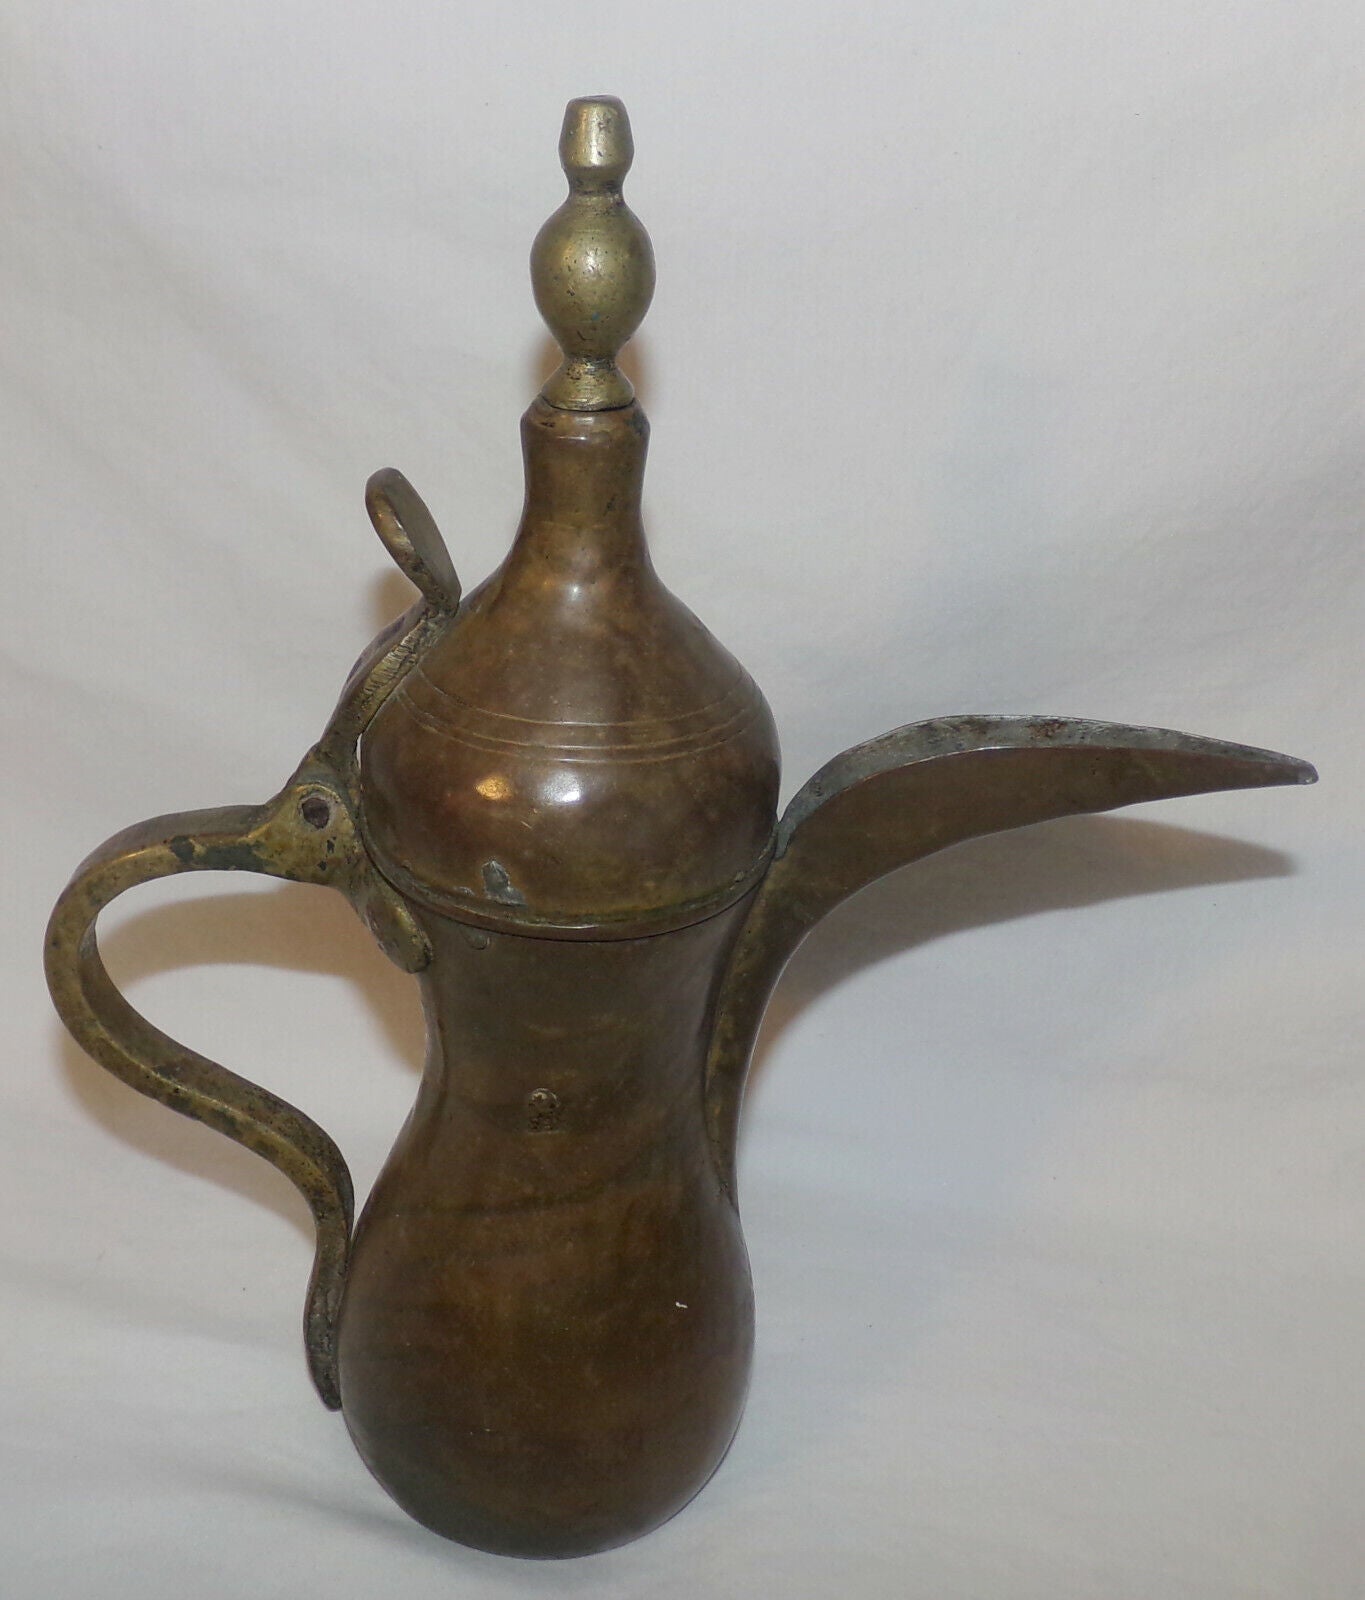 Antique Dallah Arabic Middle Eastern Coffee Pot For Sale at